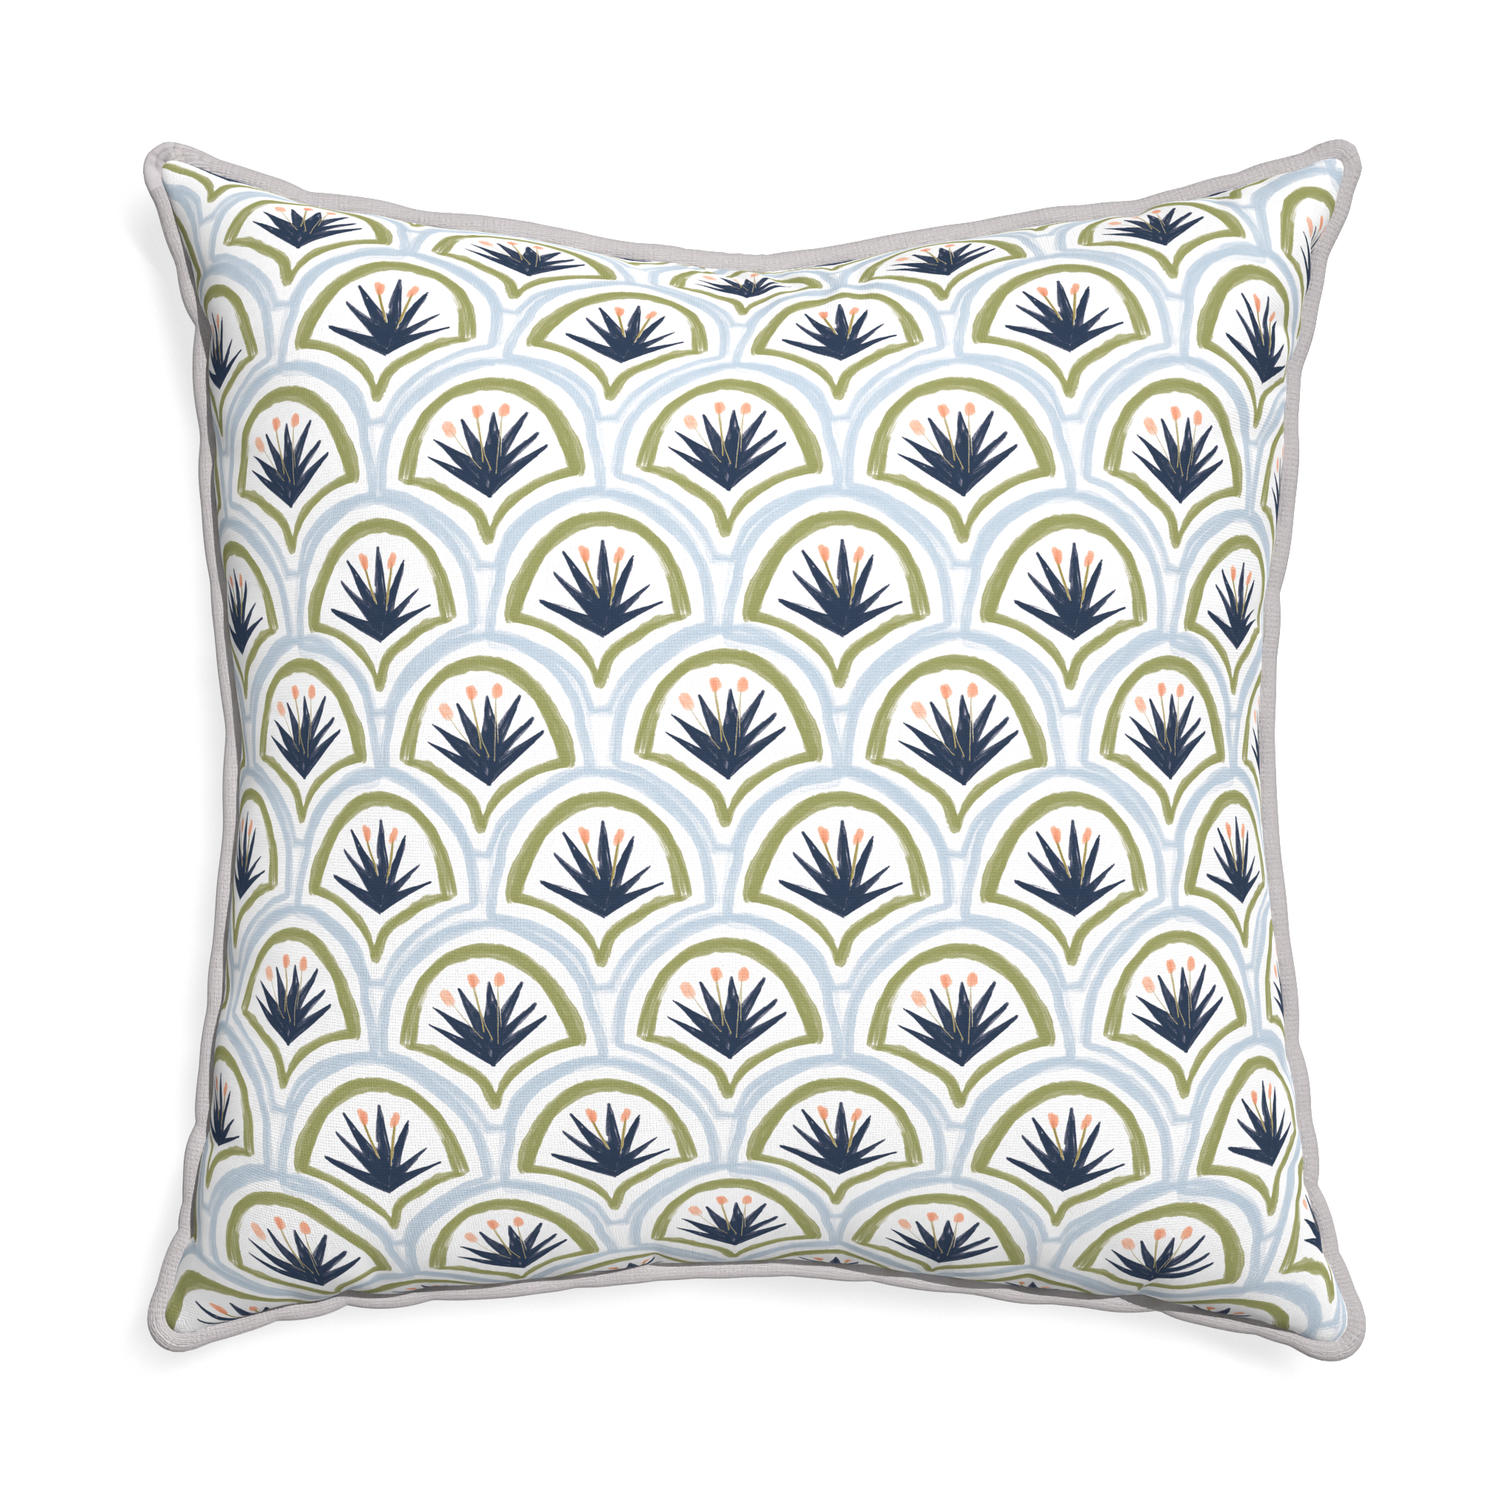 Euro-sham thatcher midnight custom art deco palm patternpillow with pebble piping on white background